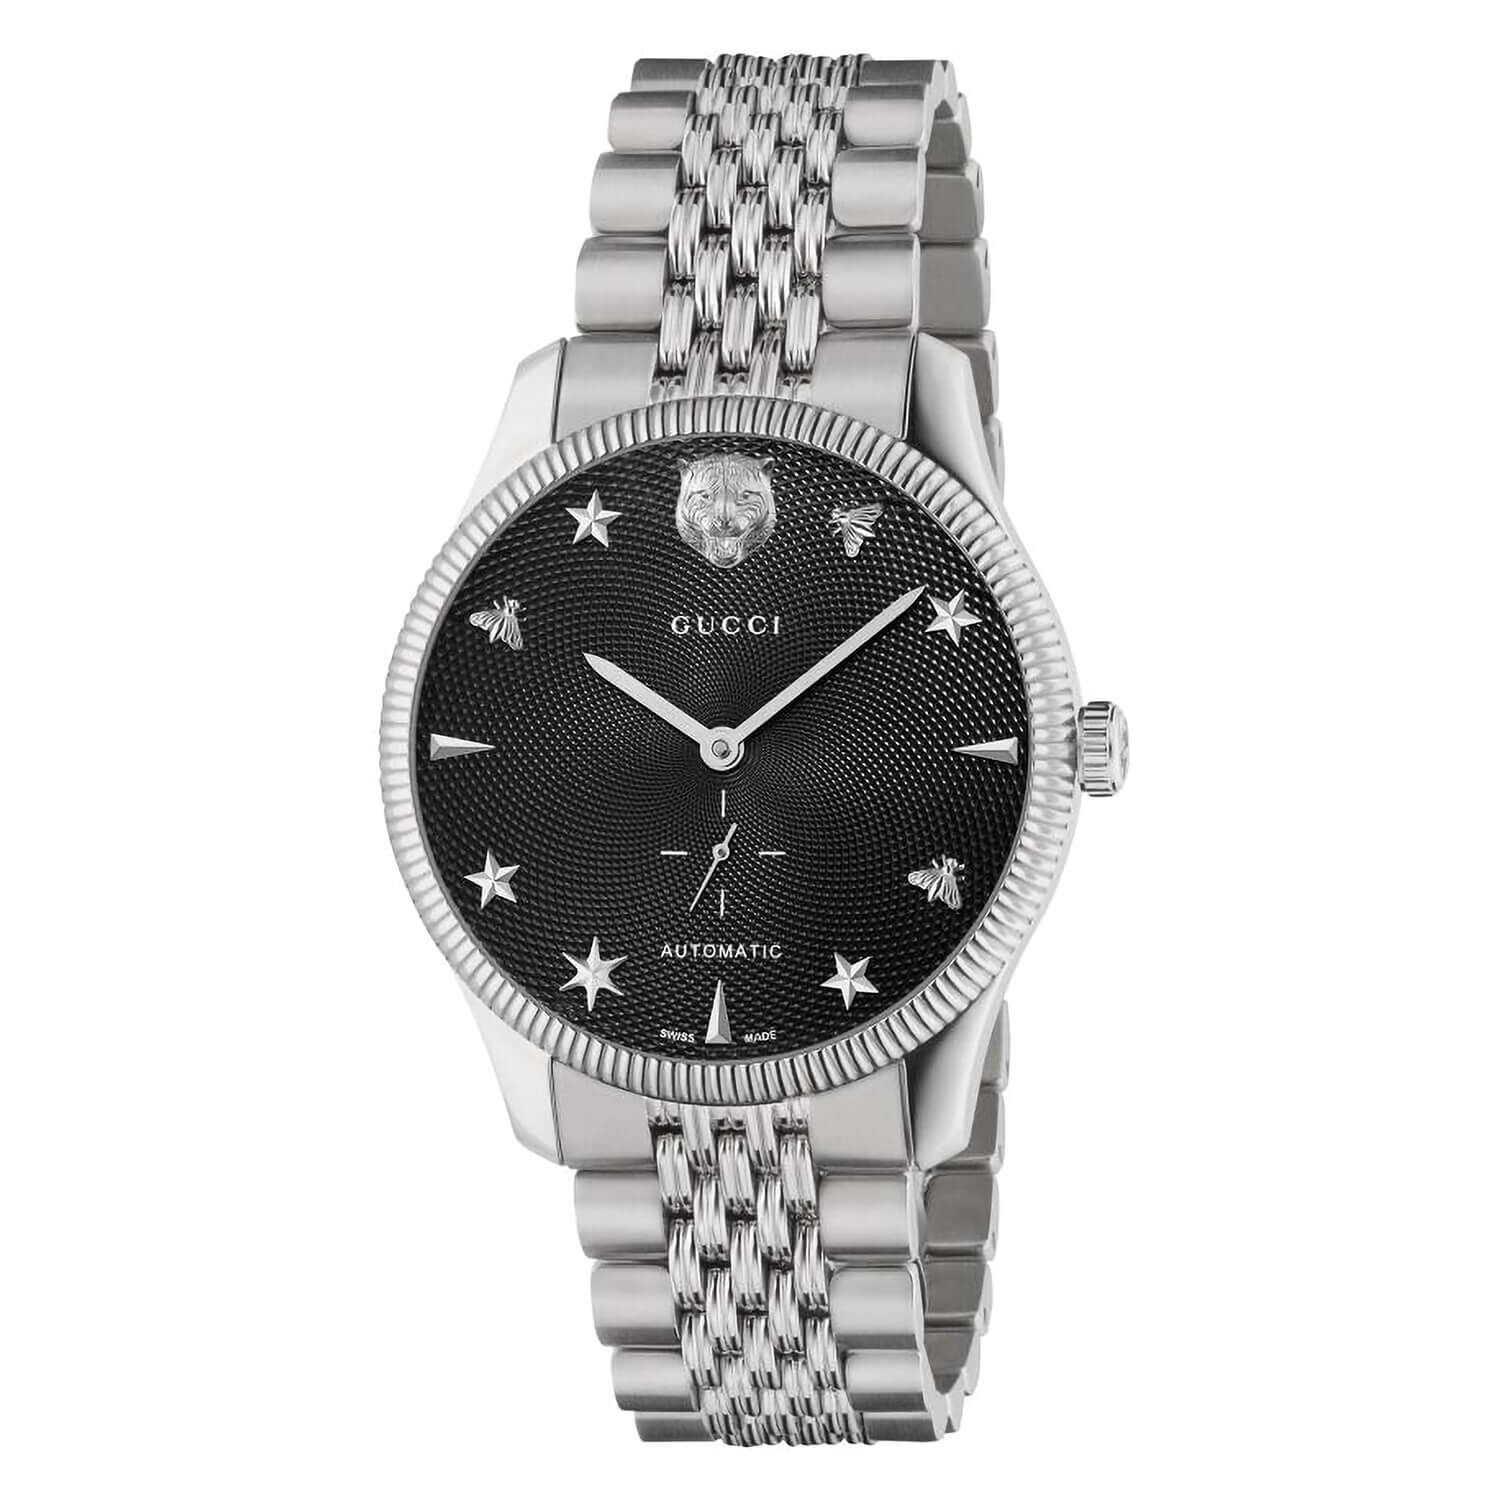 Gucci G-Timeless Automatic Black Dial 40mm Mens Watch